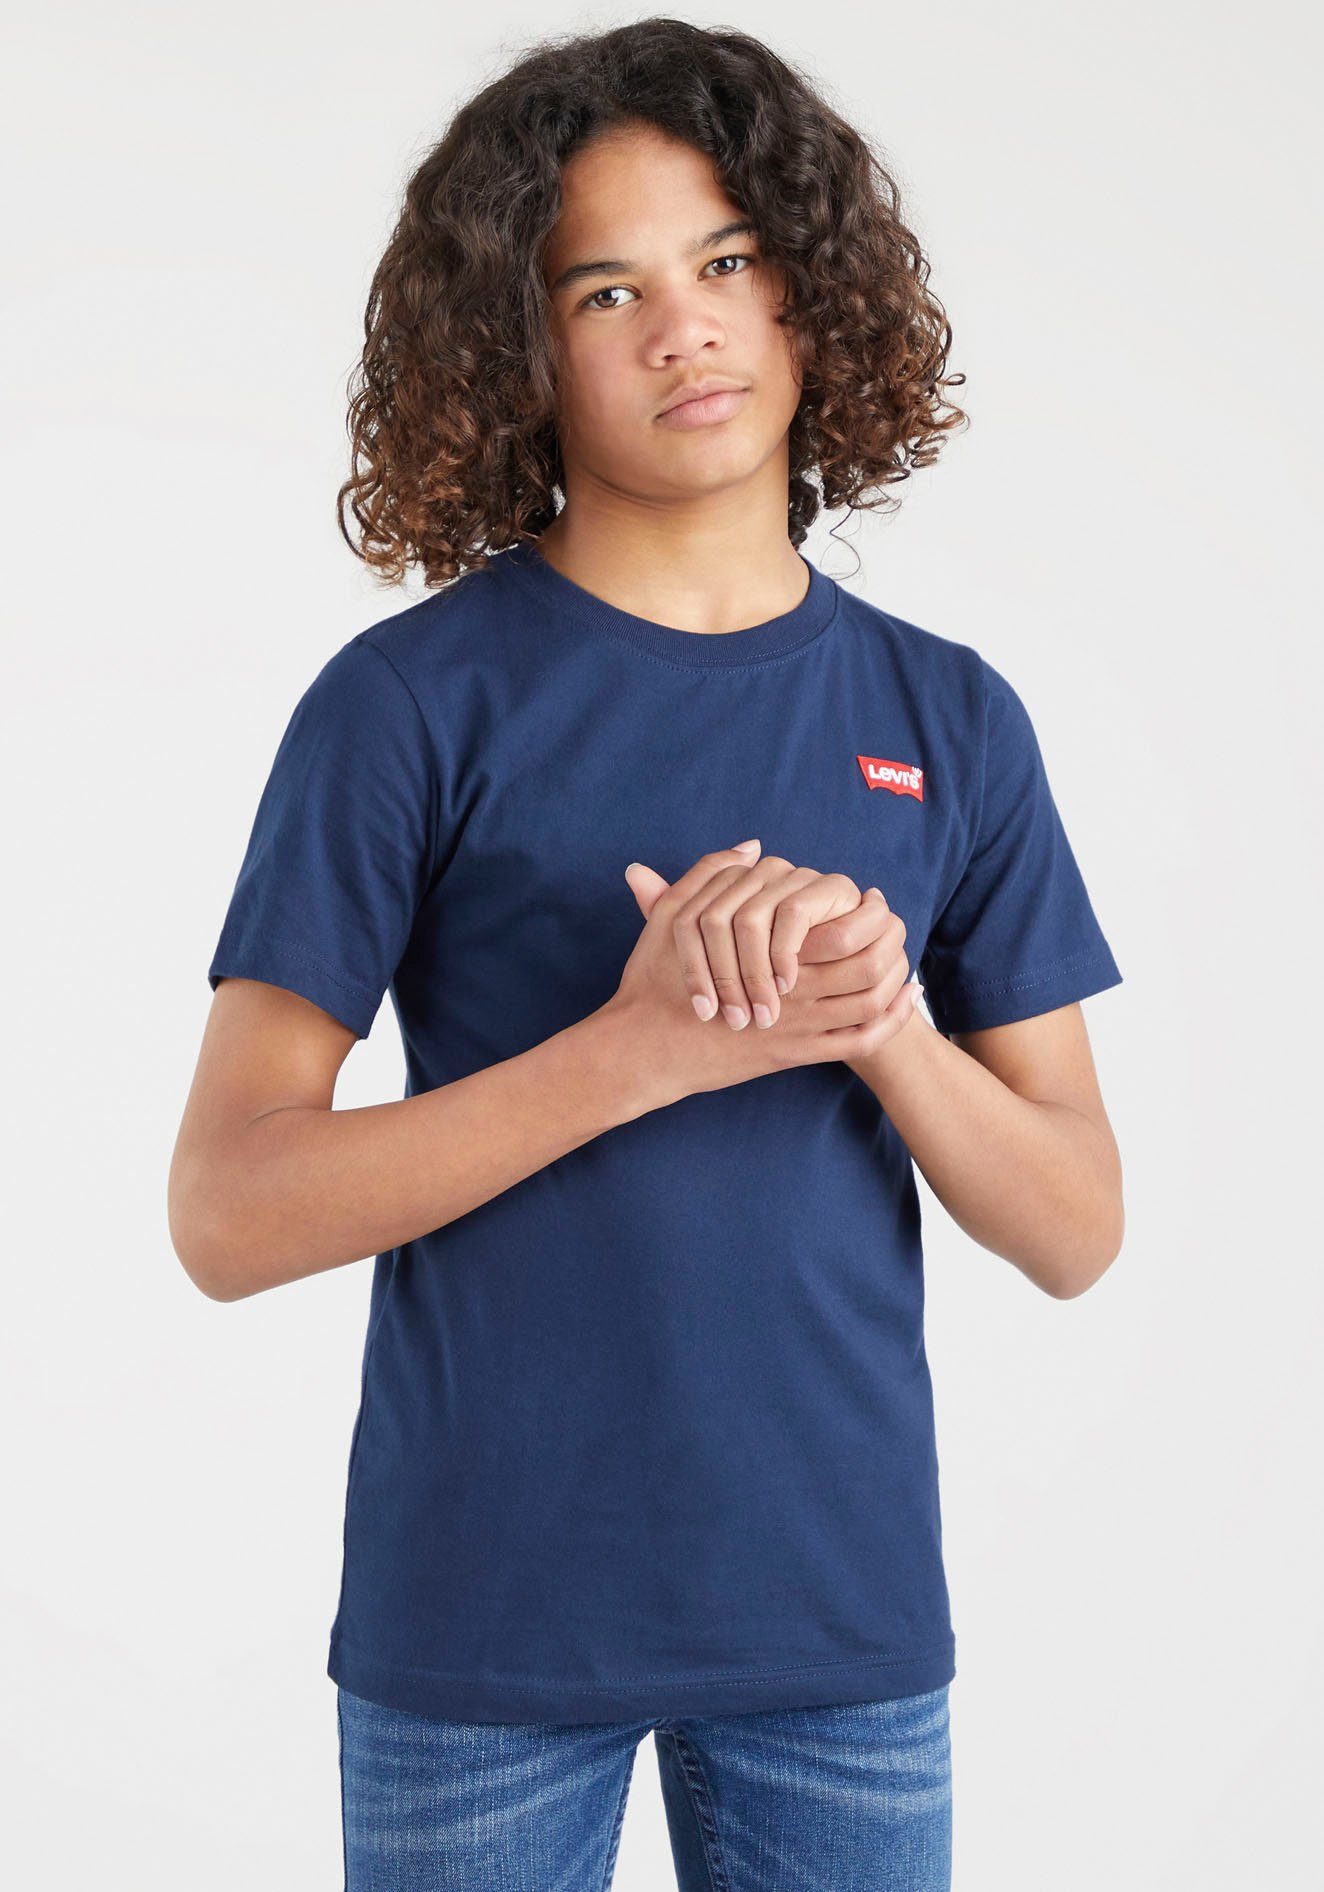 for T-Shirt BOYS navy HIT CHEST BATWING Kids Levi's®